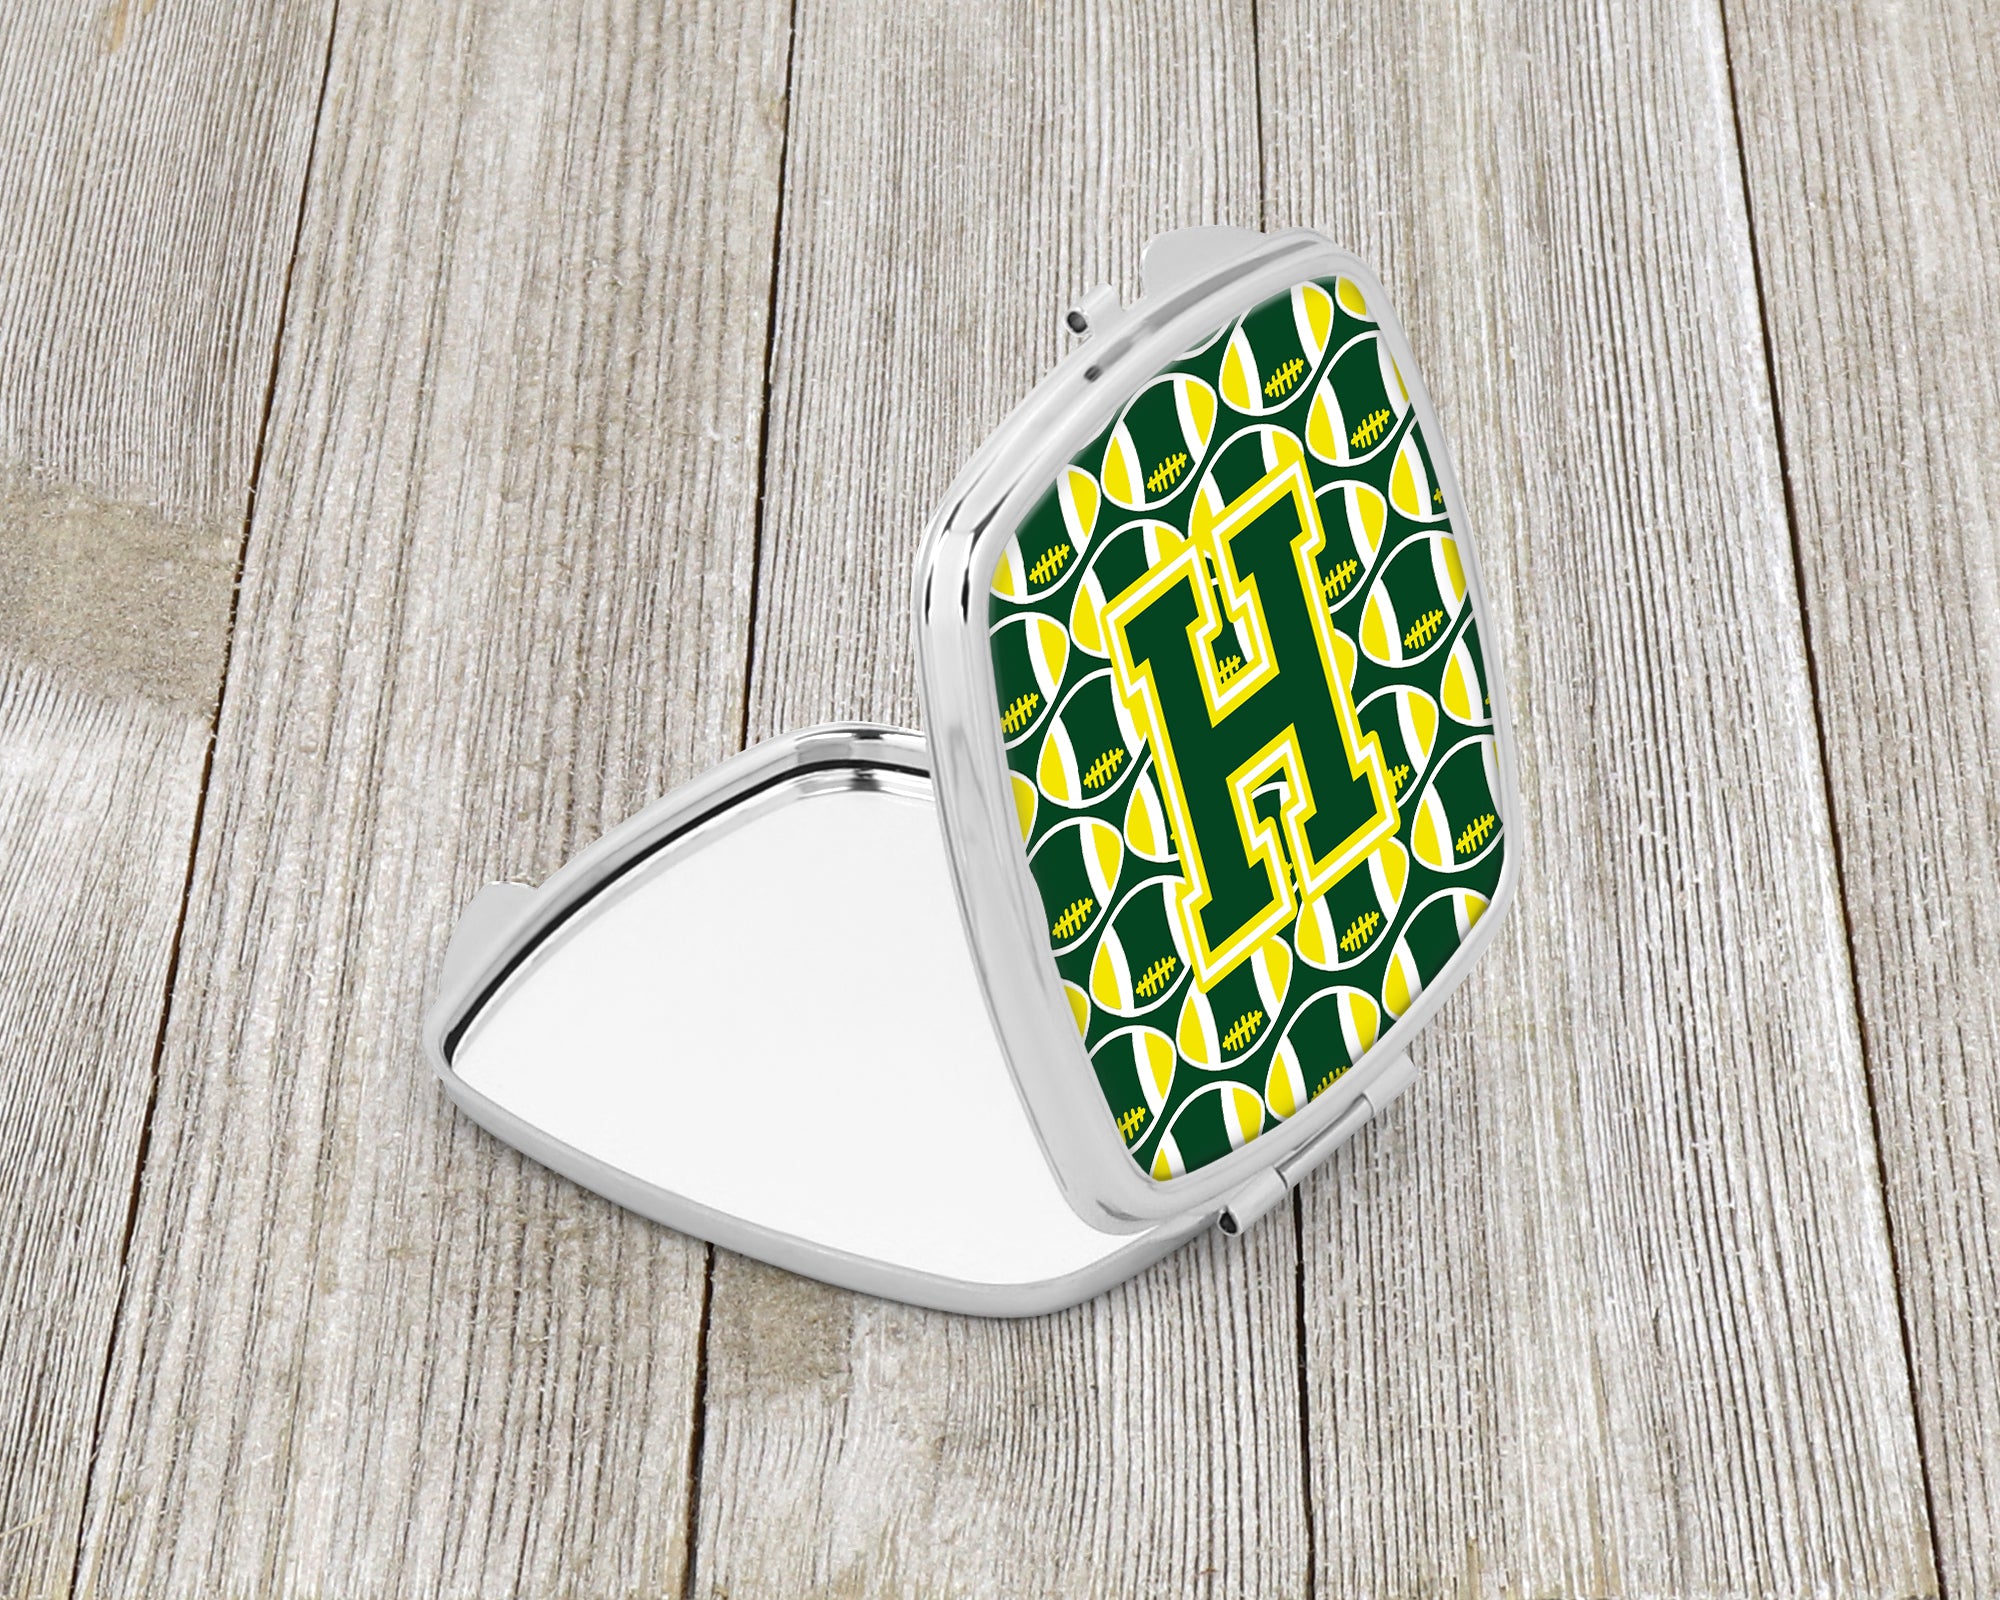 Letter H Football Green and Yellow Compact Mirror CJ1075-HSCM